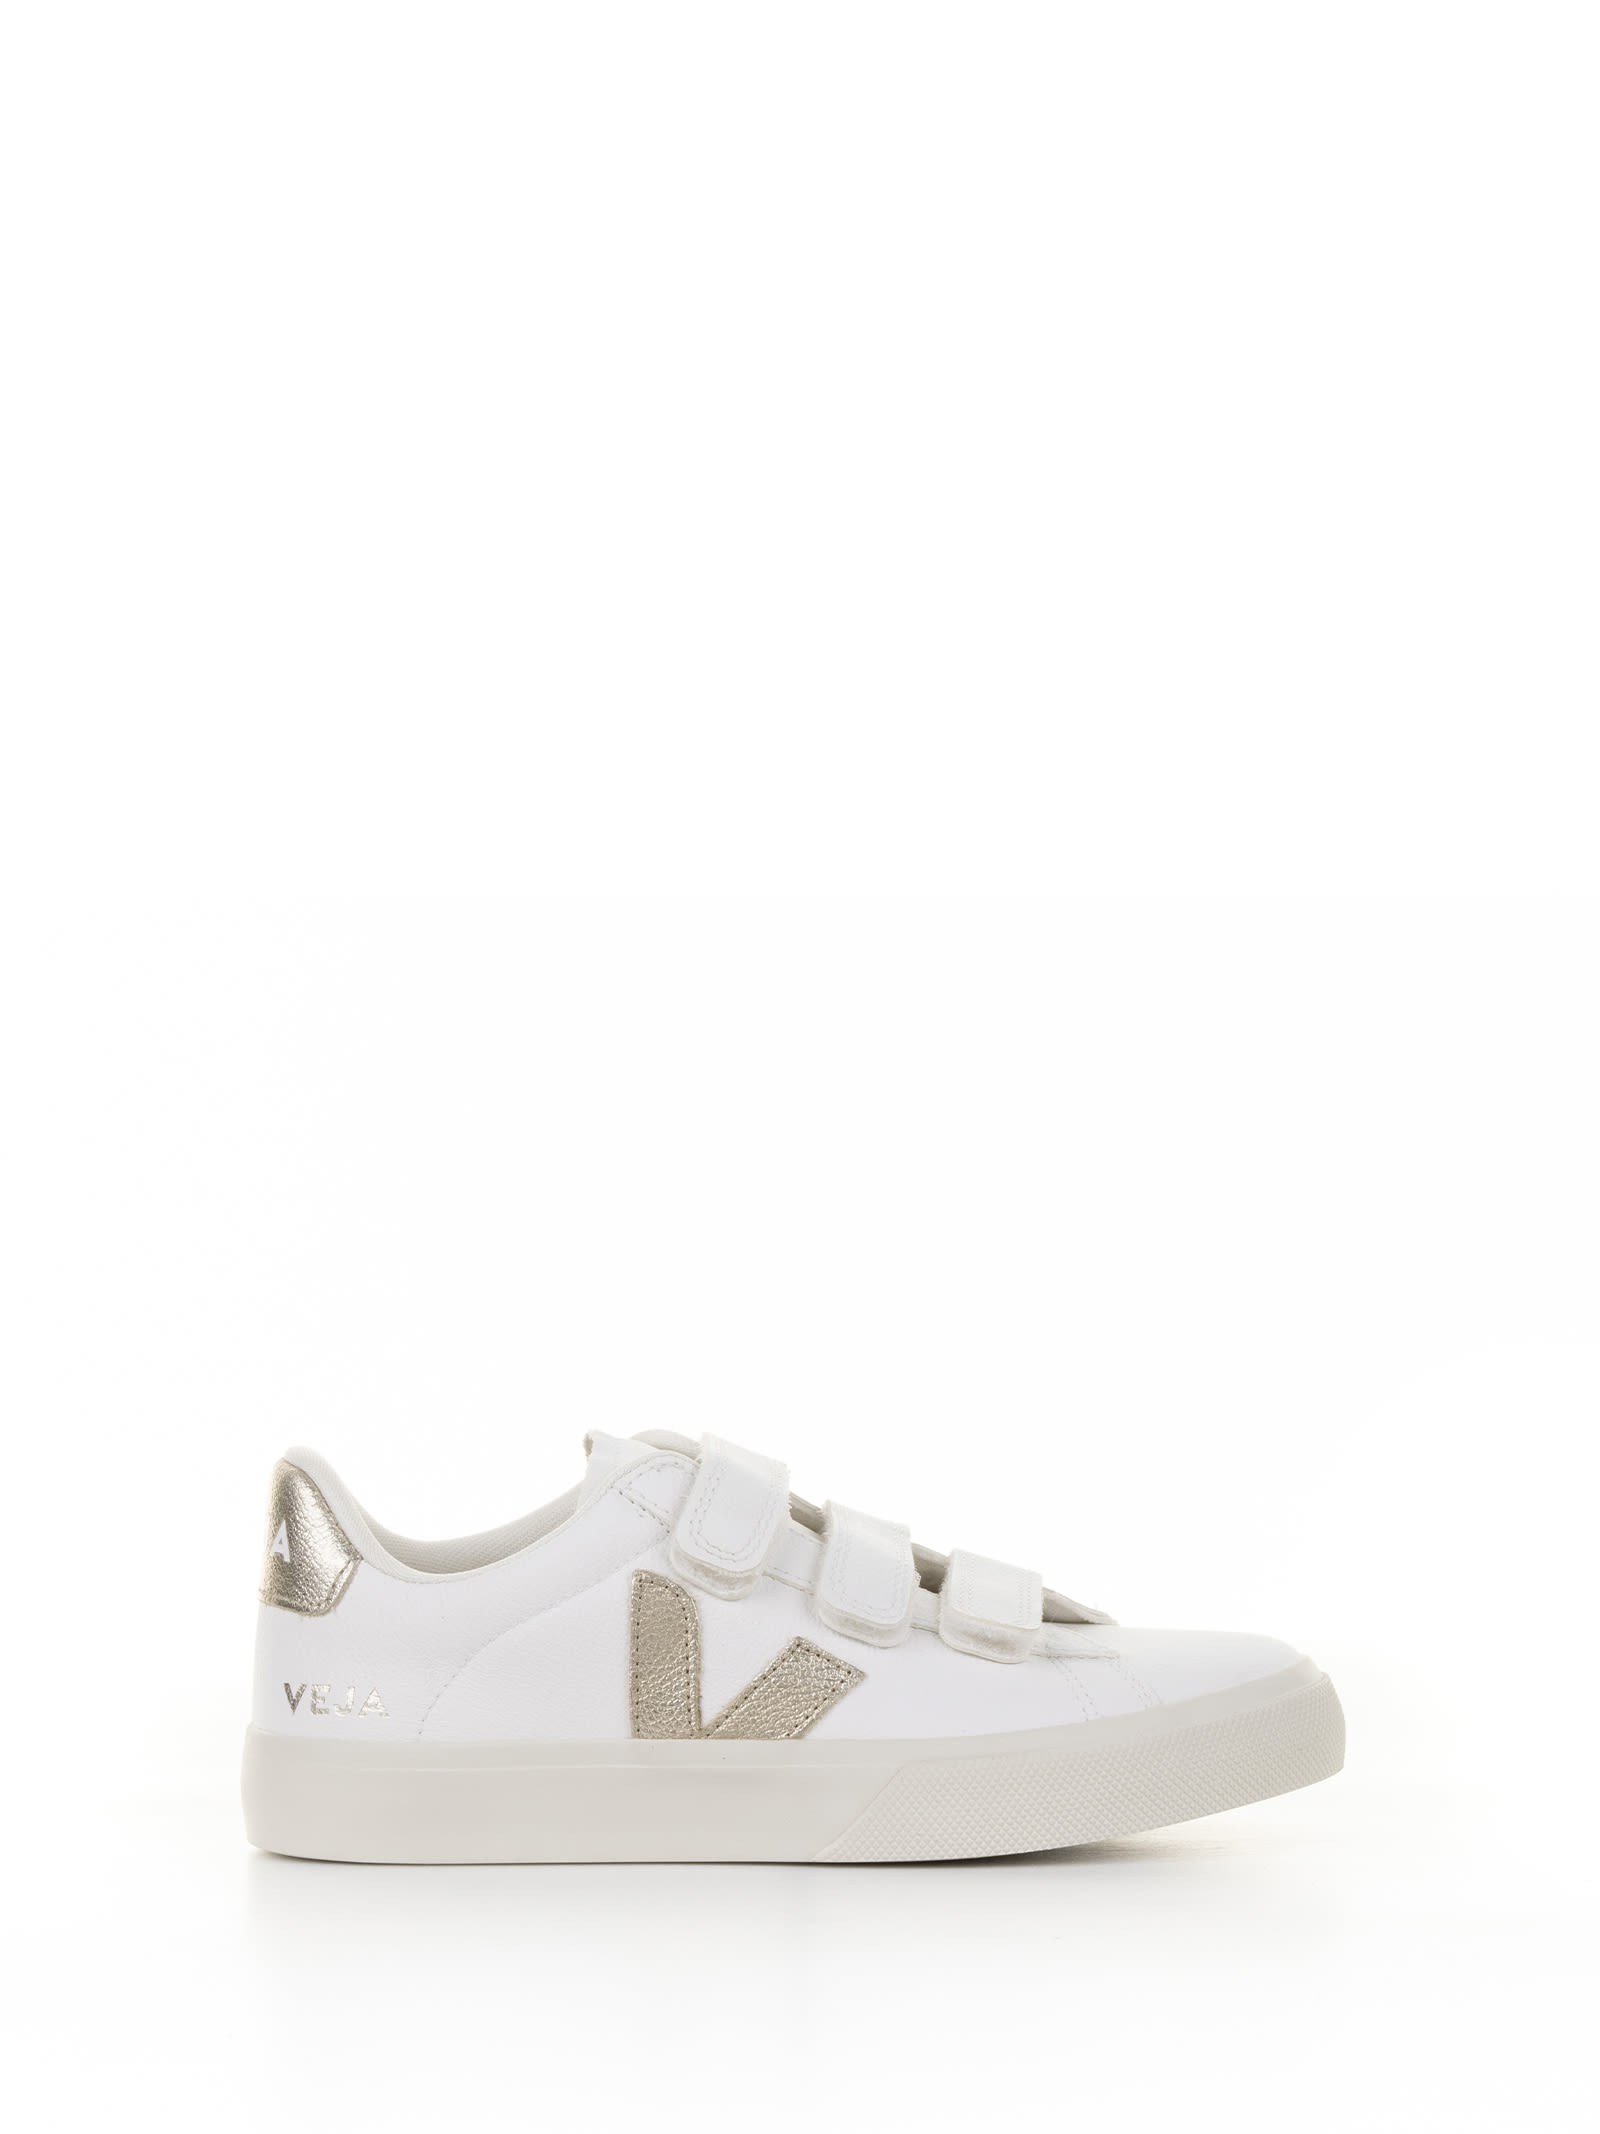 VEJA RECIFE SNEAKER IN LEATHER WITH STRAP FOR WOMEN